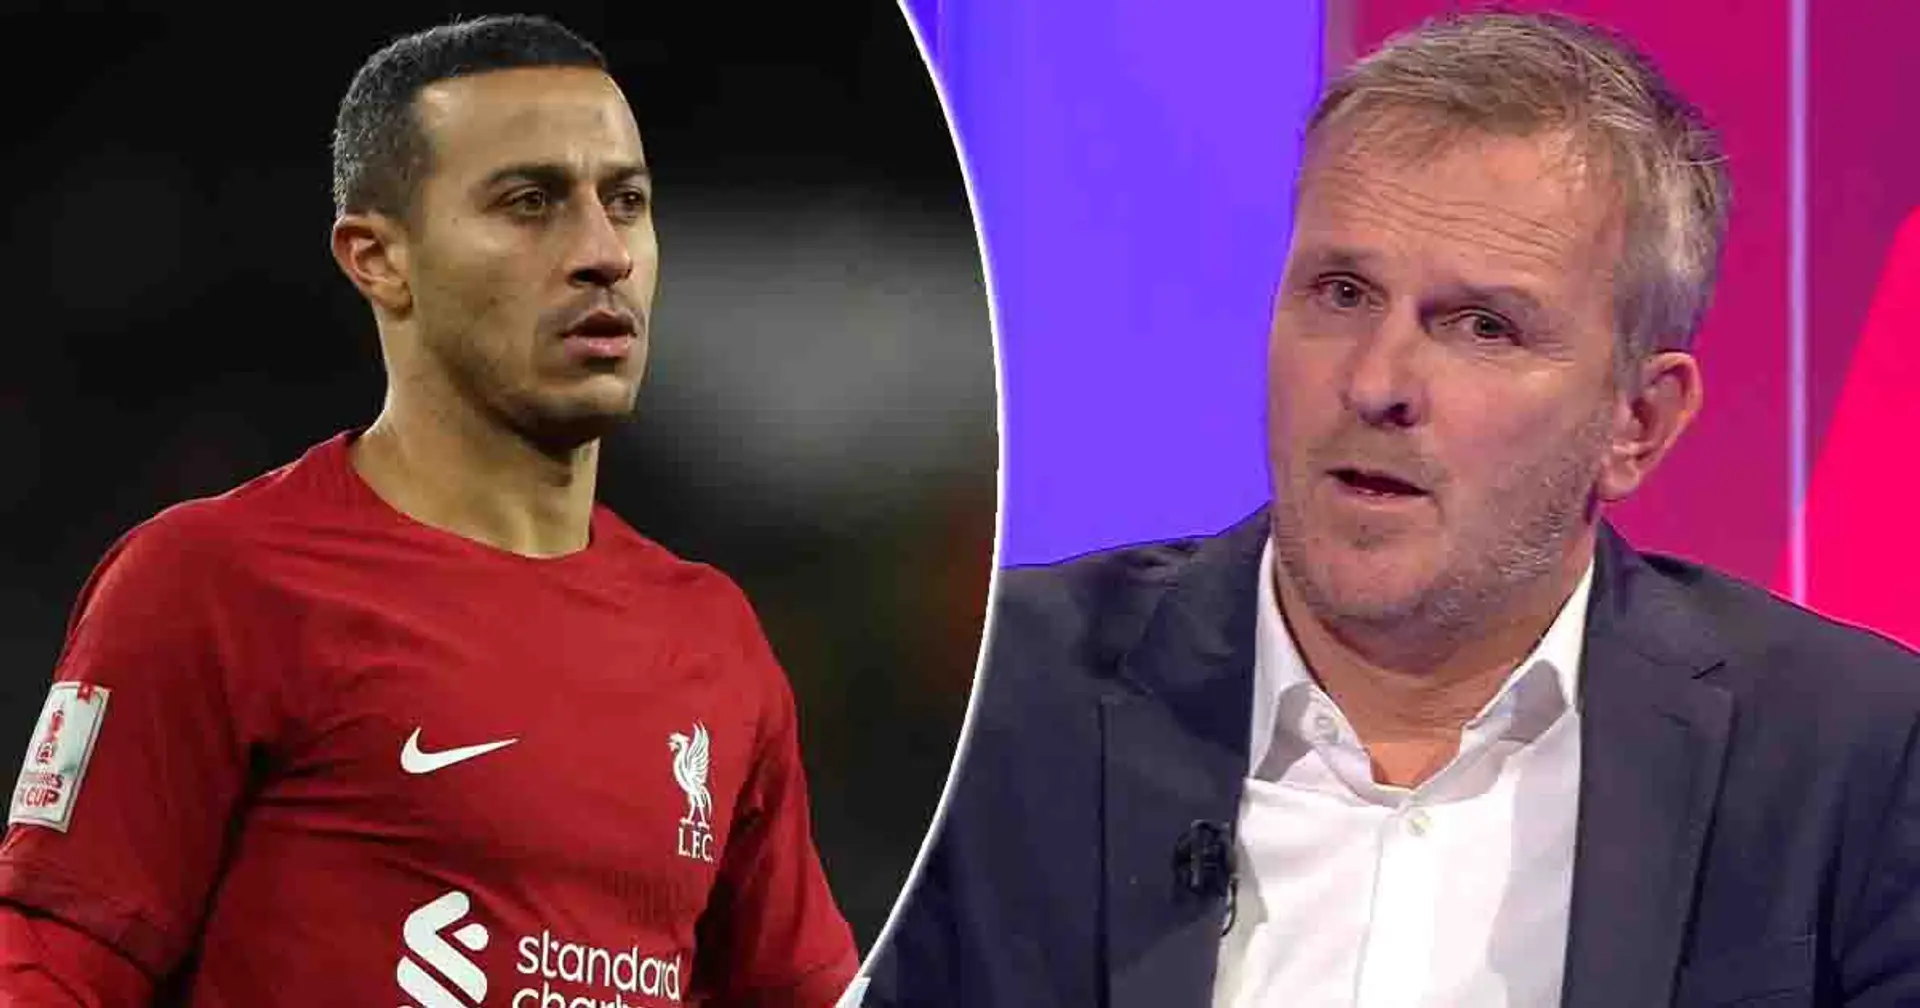 'What does he actually do?': Didi Hamann questions Thiago's role at Liverpool